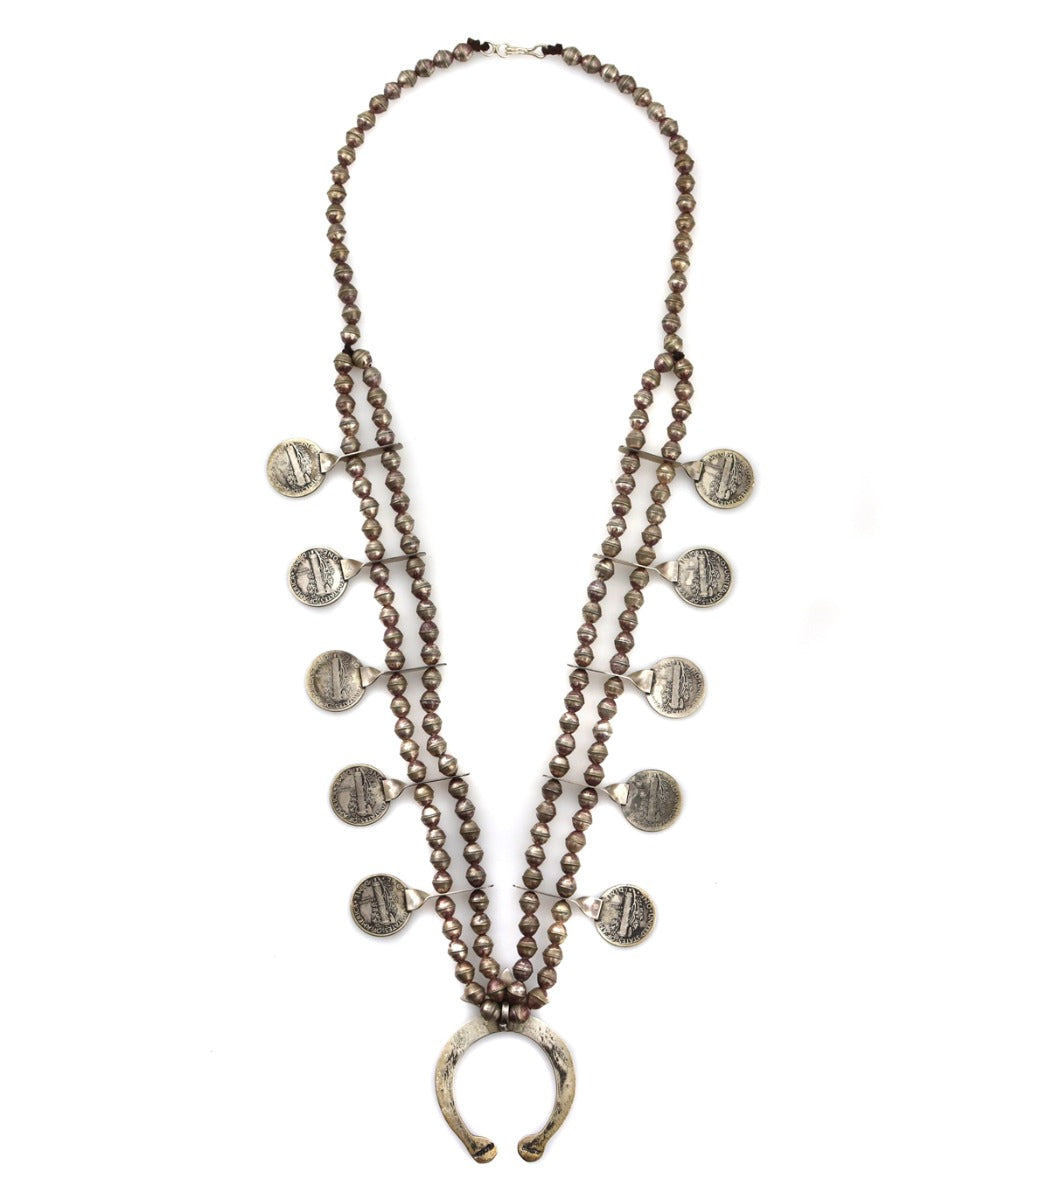 Navajo Silver Necklace with Mercury Dimes c. 1960-70s, 24" length (J91243B-0721-004) 3
